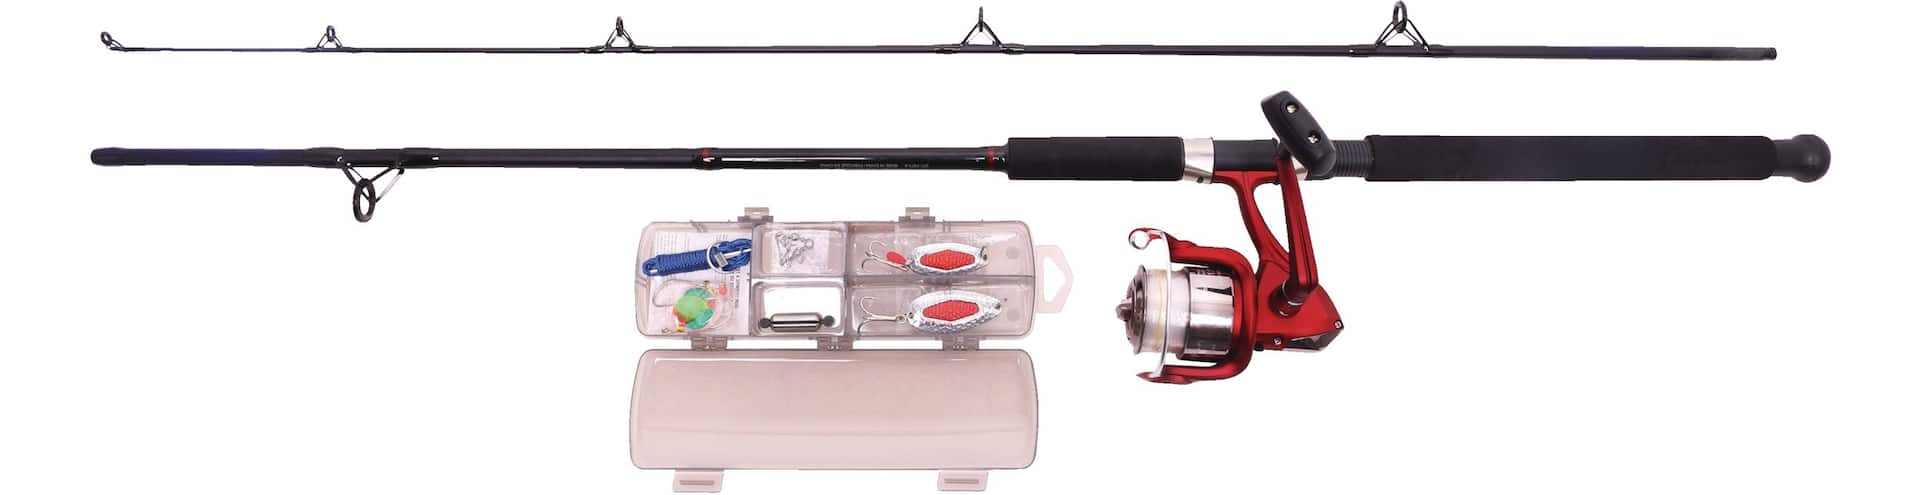 Portable Fishing Rod Kit with Fishing Reel Bait, Fishing Rod and Reel Combo£¬for  Saltwater Freshwater, Reels -  Canada